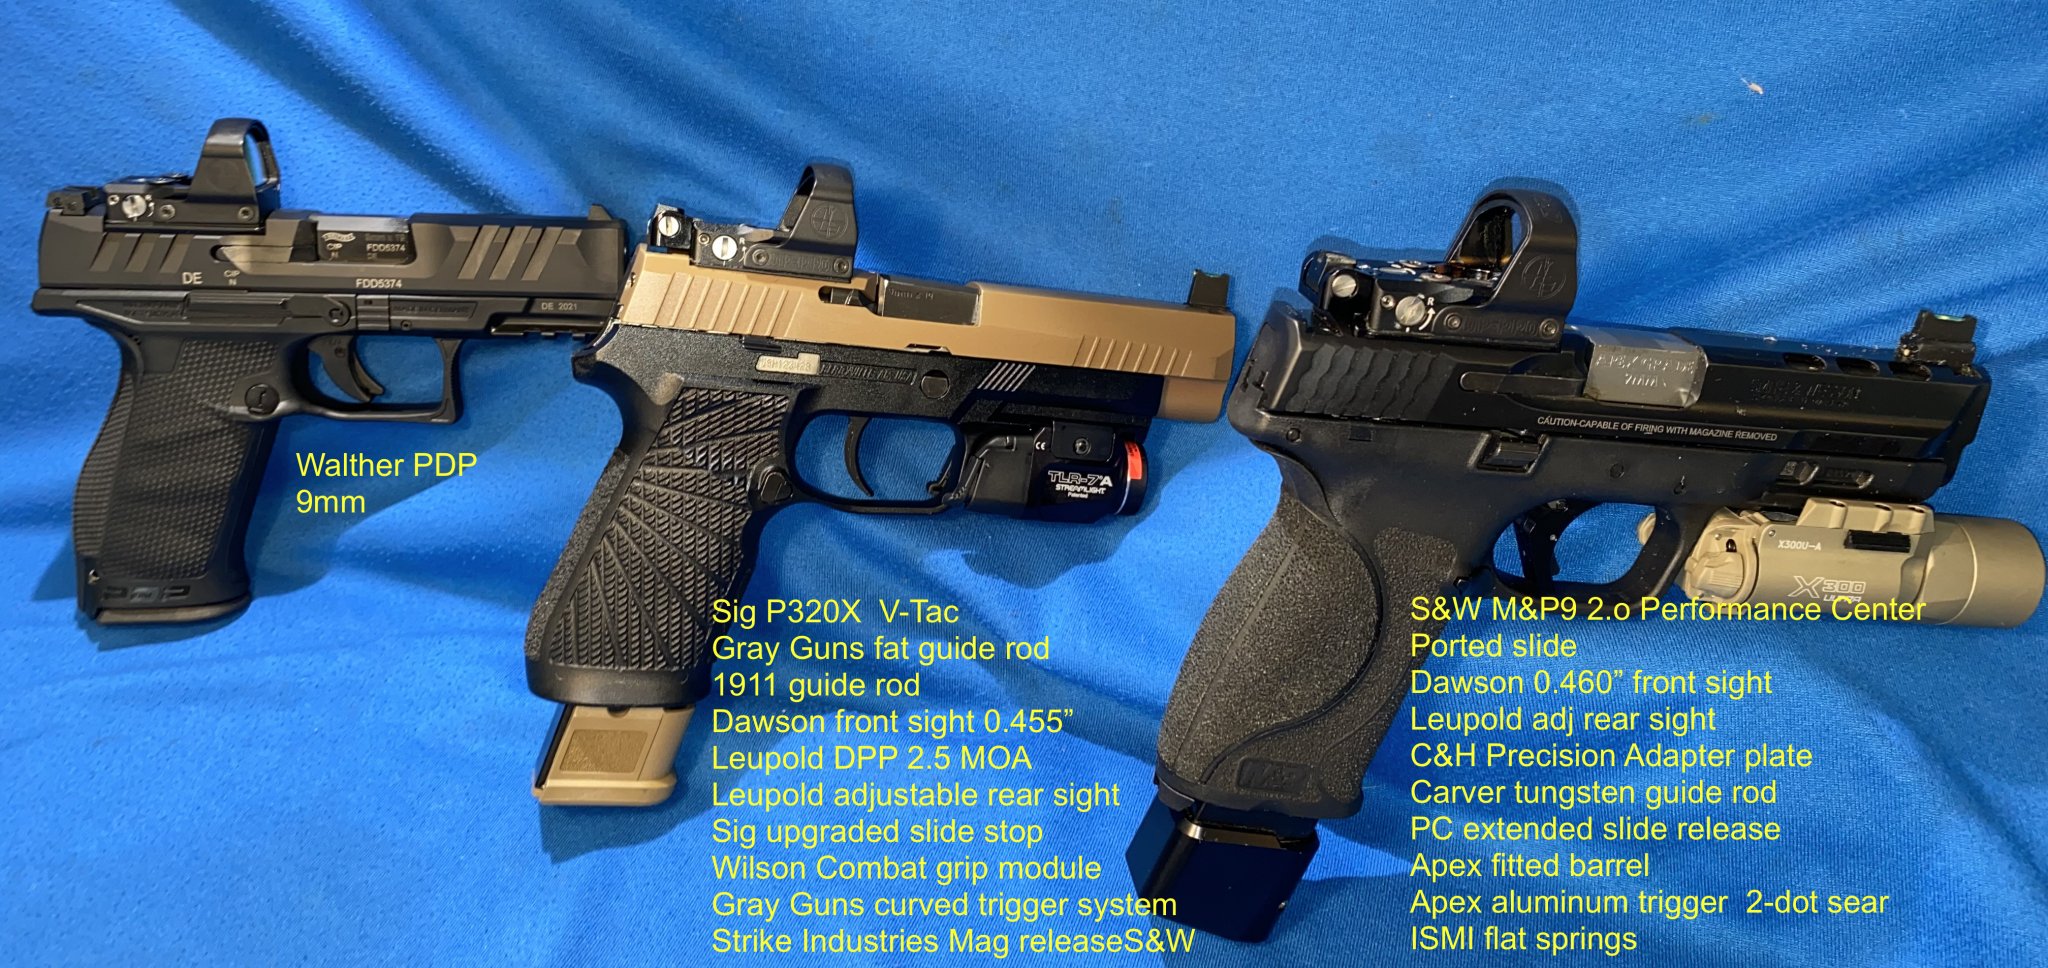 IMG_8638Walther PDP Sig P320 M&P9 2.0 PC with Leupold Delta Point Pro 2.5 MOA and Holsters 03....jpg